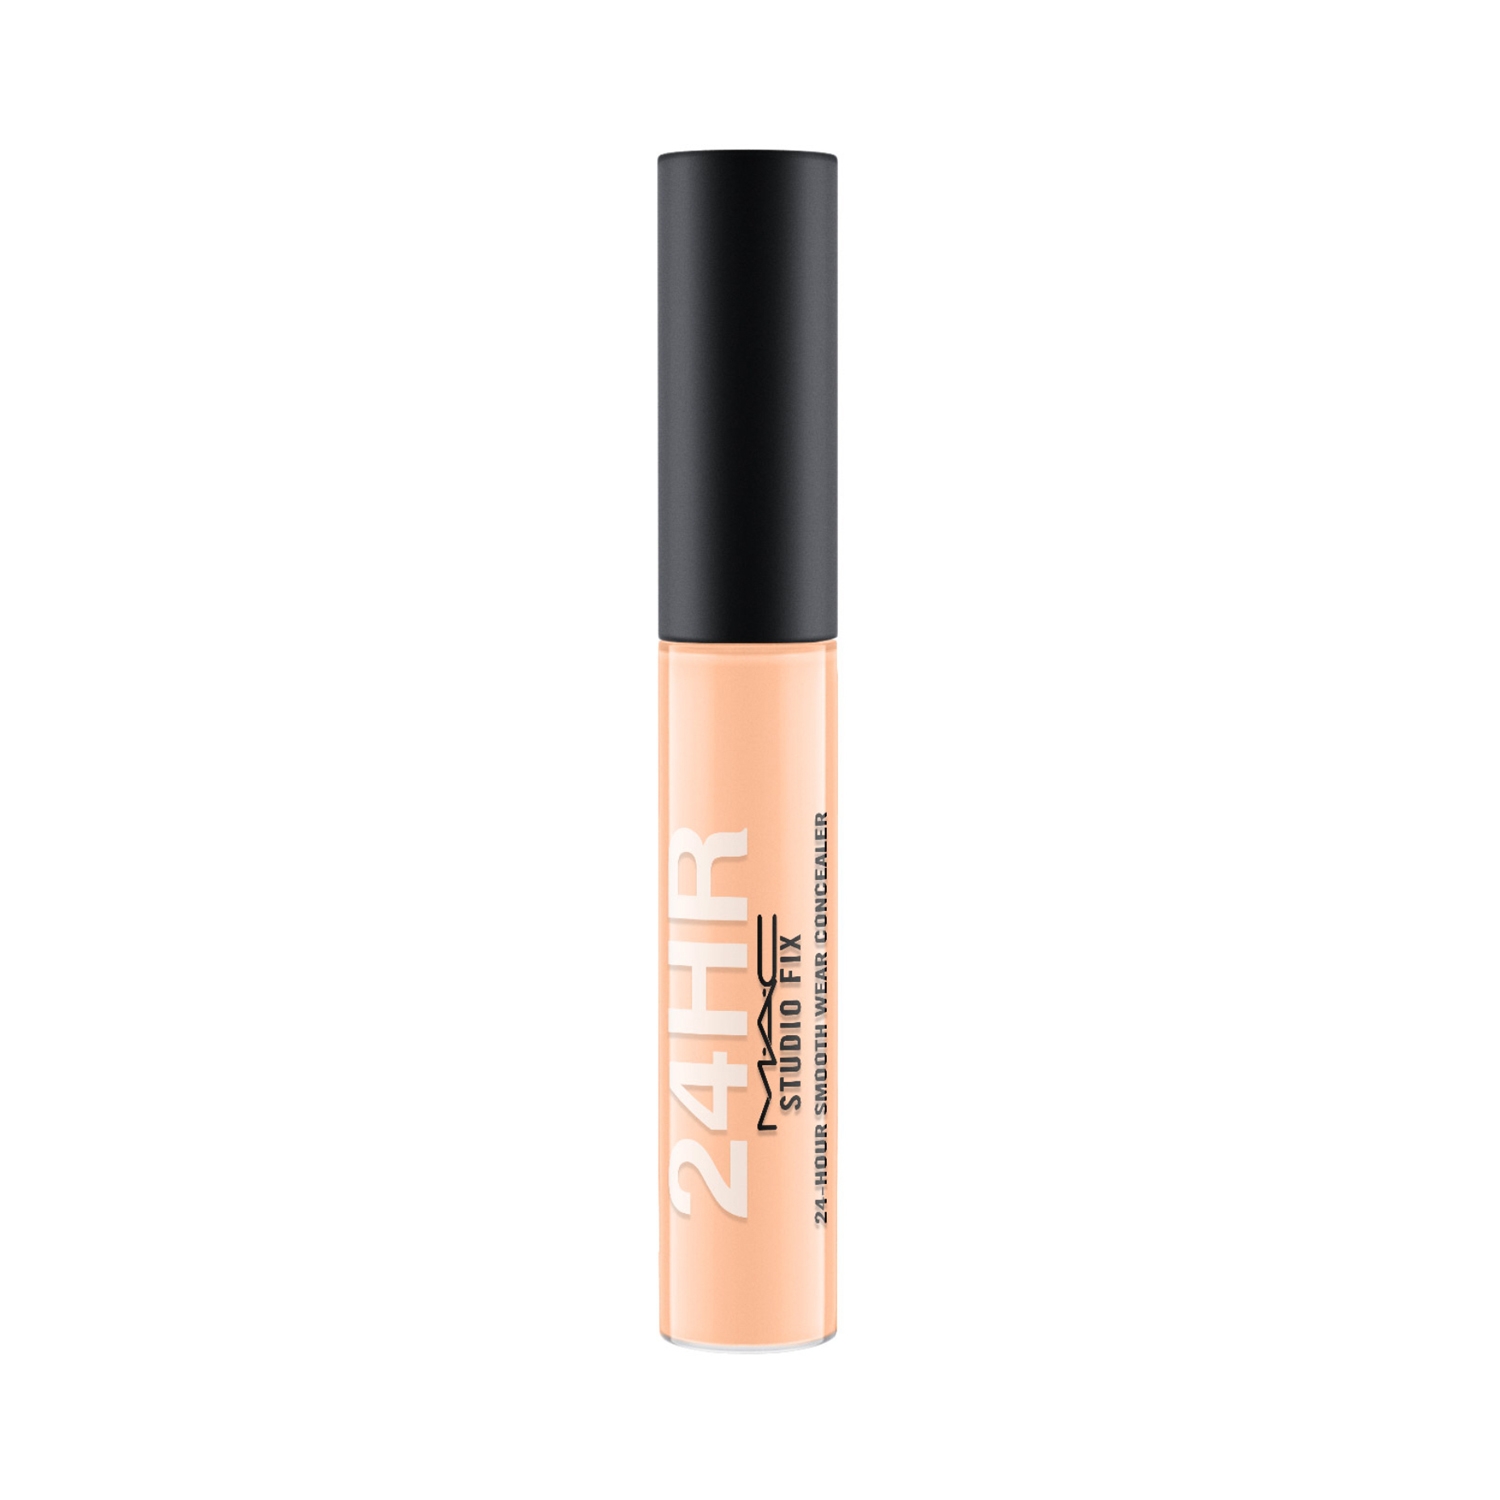 M.A.C | M.A.C Studio Fix 24-Hour Smooth Wear Concealer - NW25 (7ml)